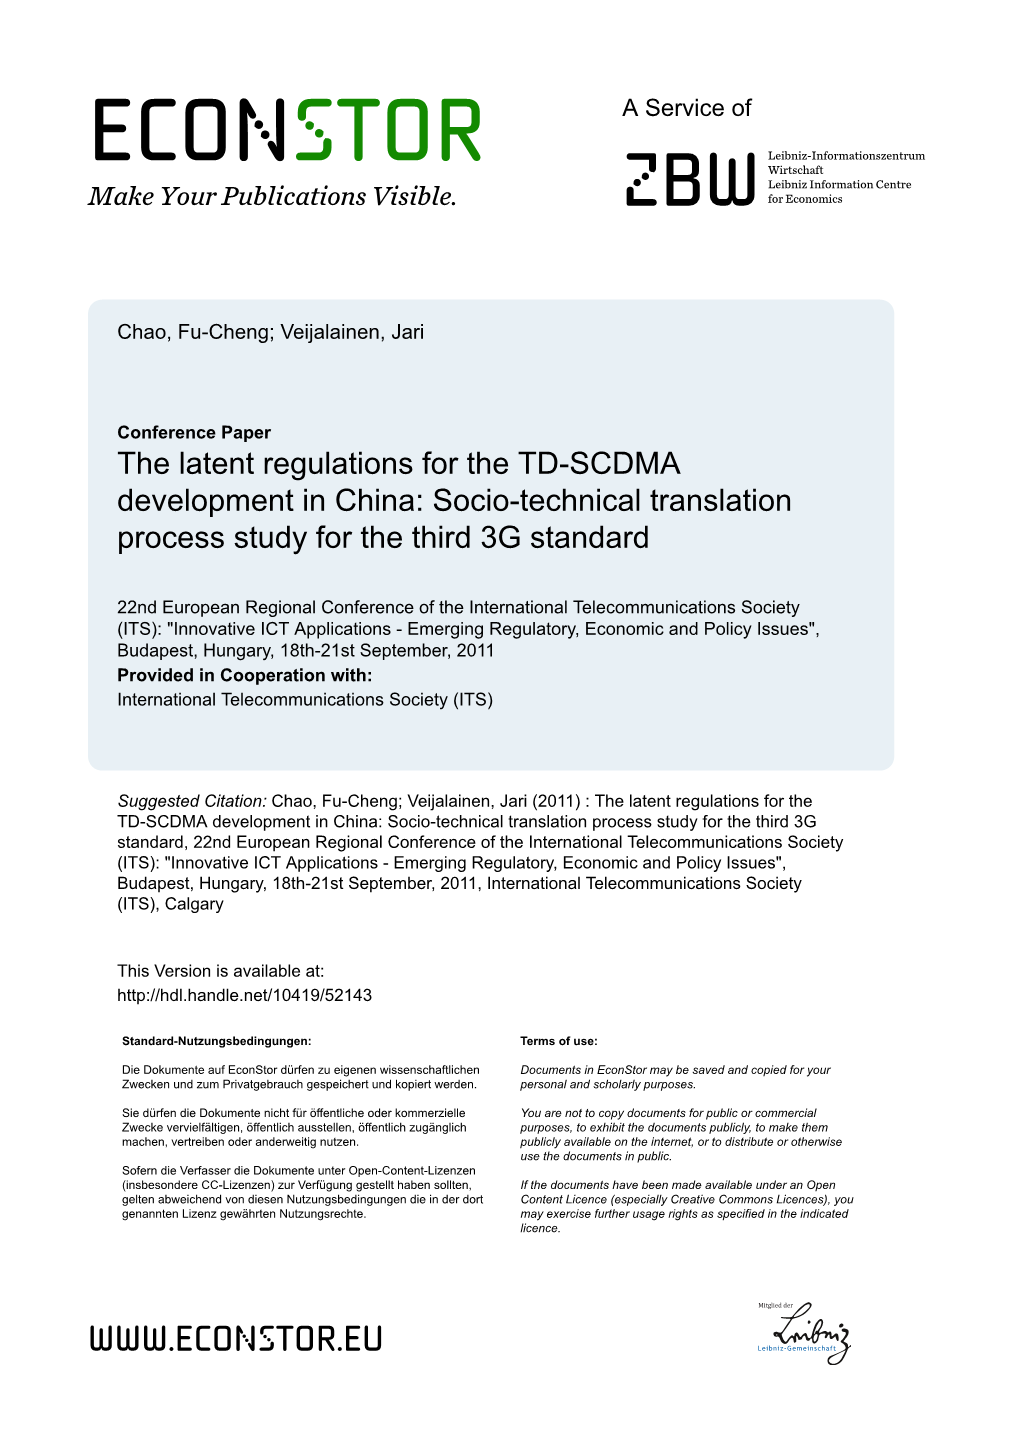 The Latent Regulations for the TD-SCDMA Development in China: Socio-Technical Translation Process Study for the Third 3G Standard